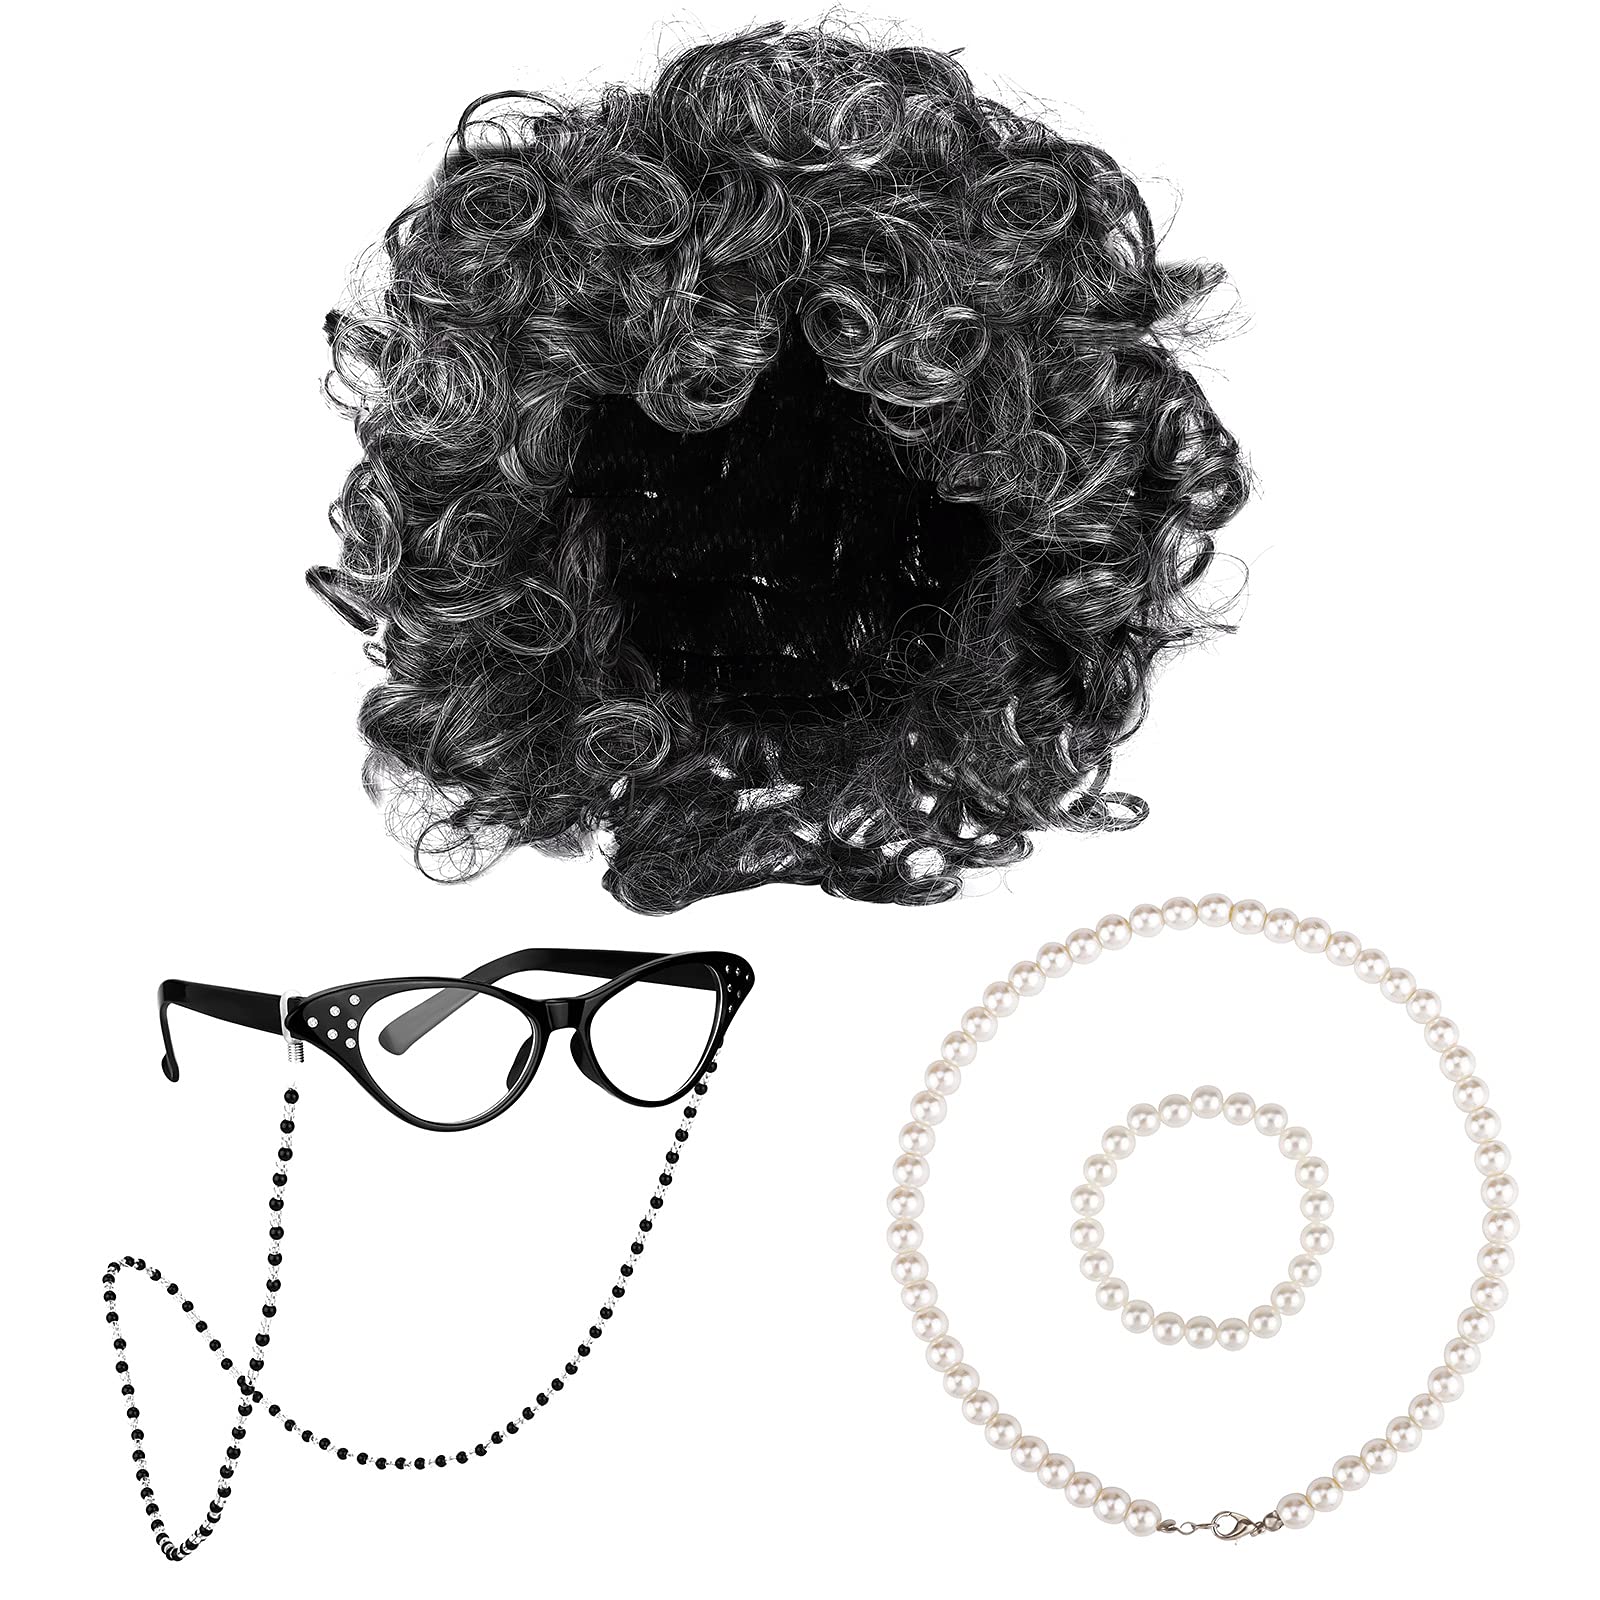 URATOT 5 Pieces Halloween Old Lady Wig Costume Set, Granny Wig with Glasses Chain, Pearl Necklace, Bracelet, Cat Eye Glasses